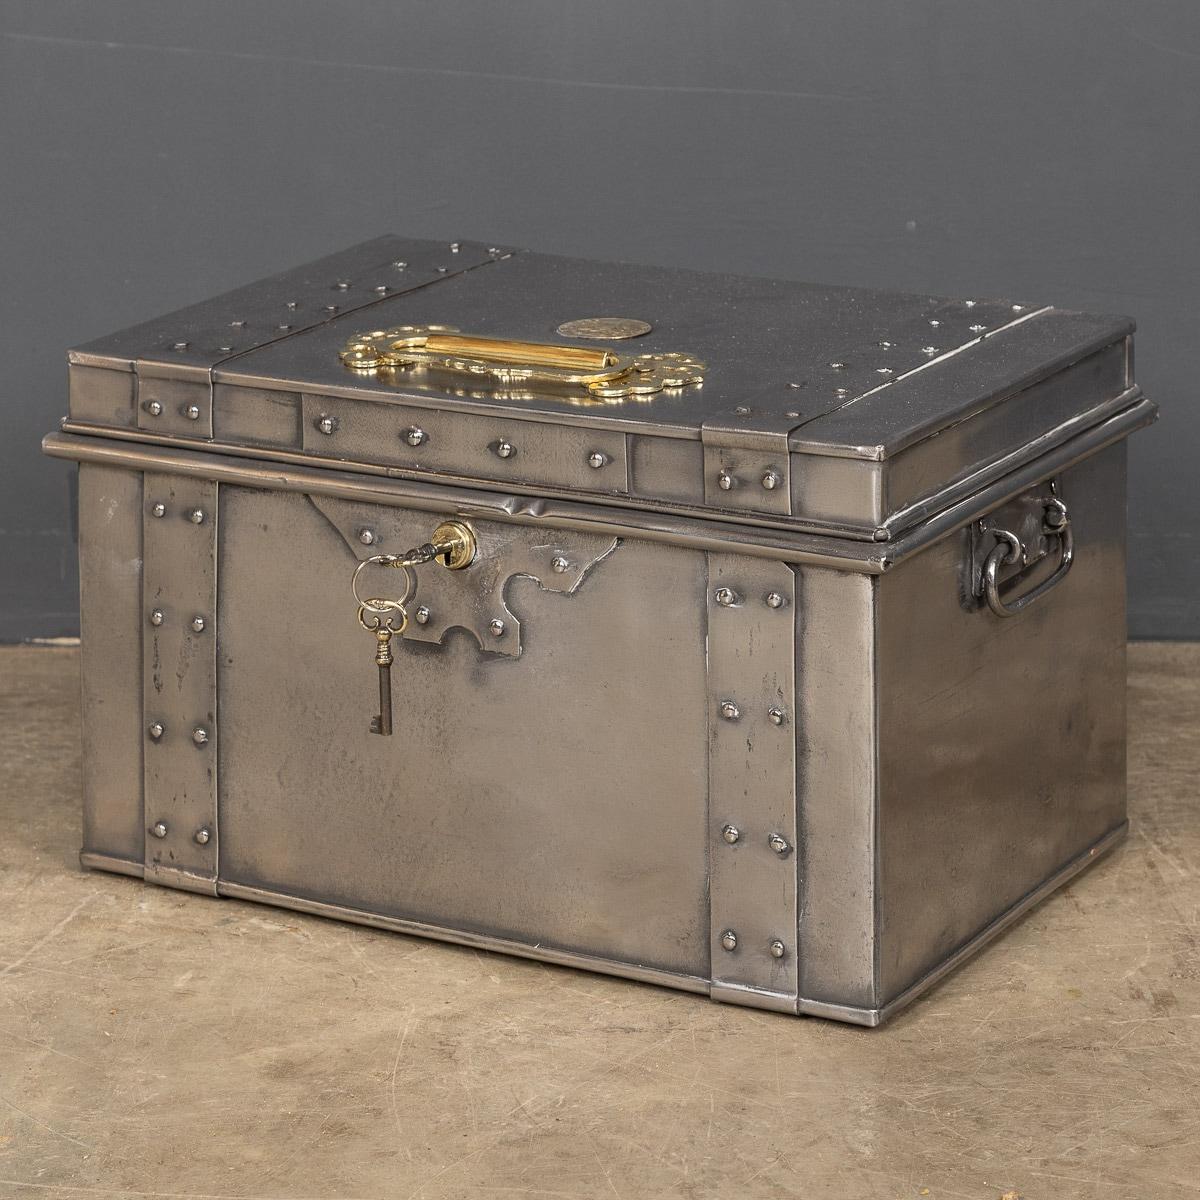 Antique early-20th century Edwardian cast iron safe, primarily used for the transport of document or valuables this was one of the first fireproof safes available. This piece has its original key. It would have been taken on long travels, perhaps on